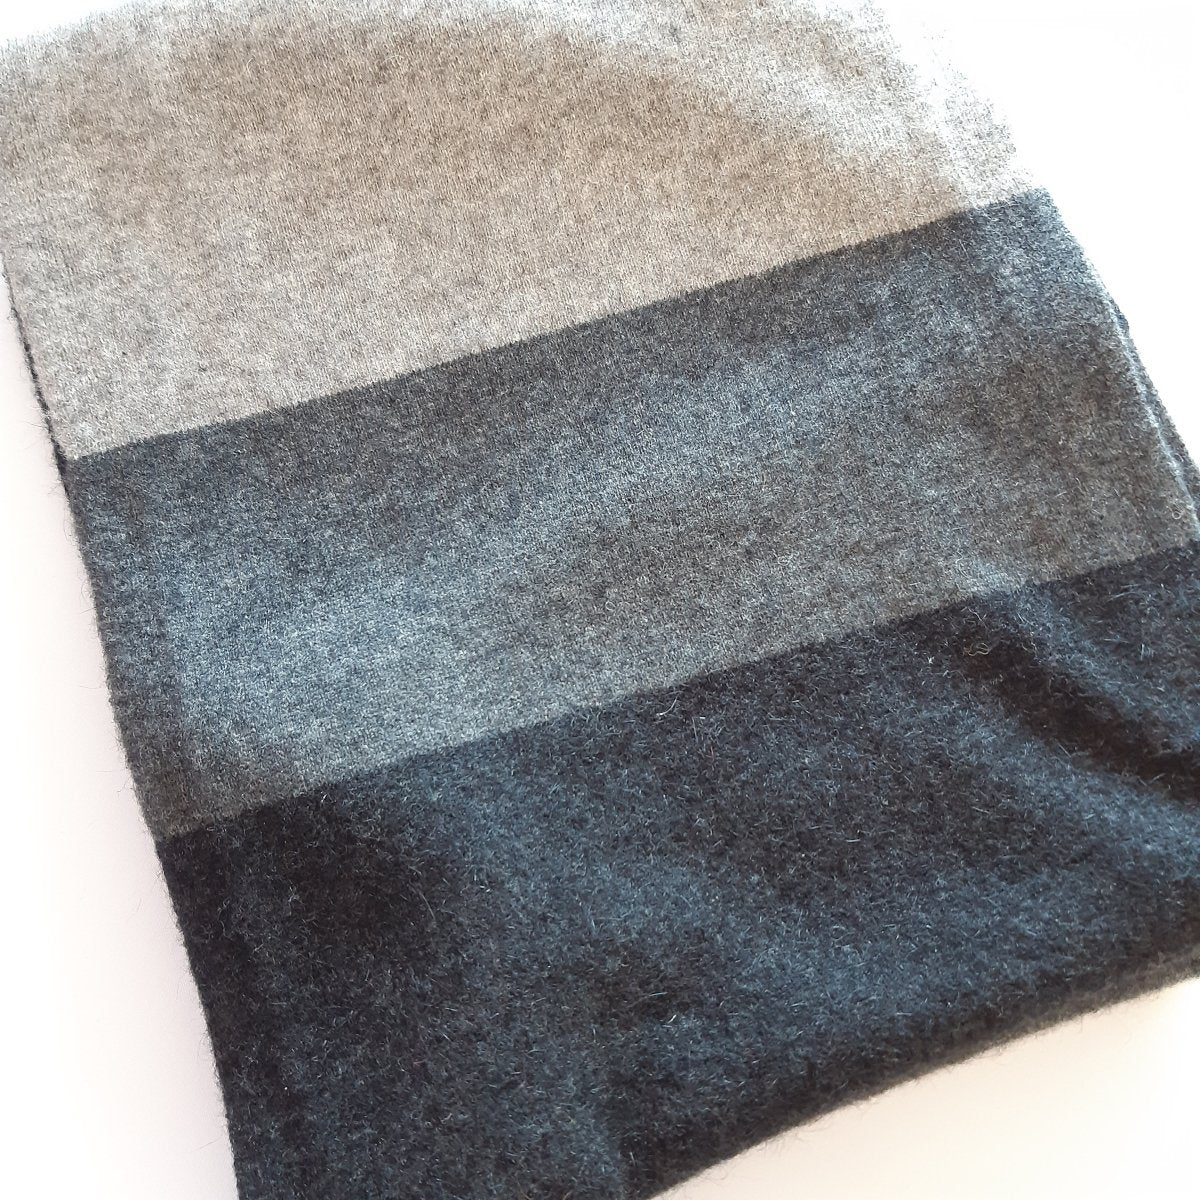 Travel Scarf - Charcoal Stripe | Native World | Hats, Scarves & Gloves | Thirty 16 Williamstown